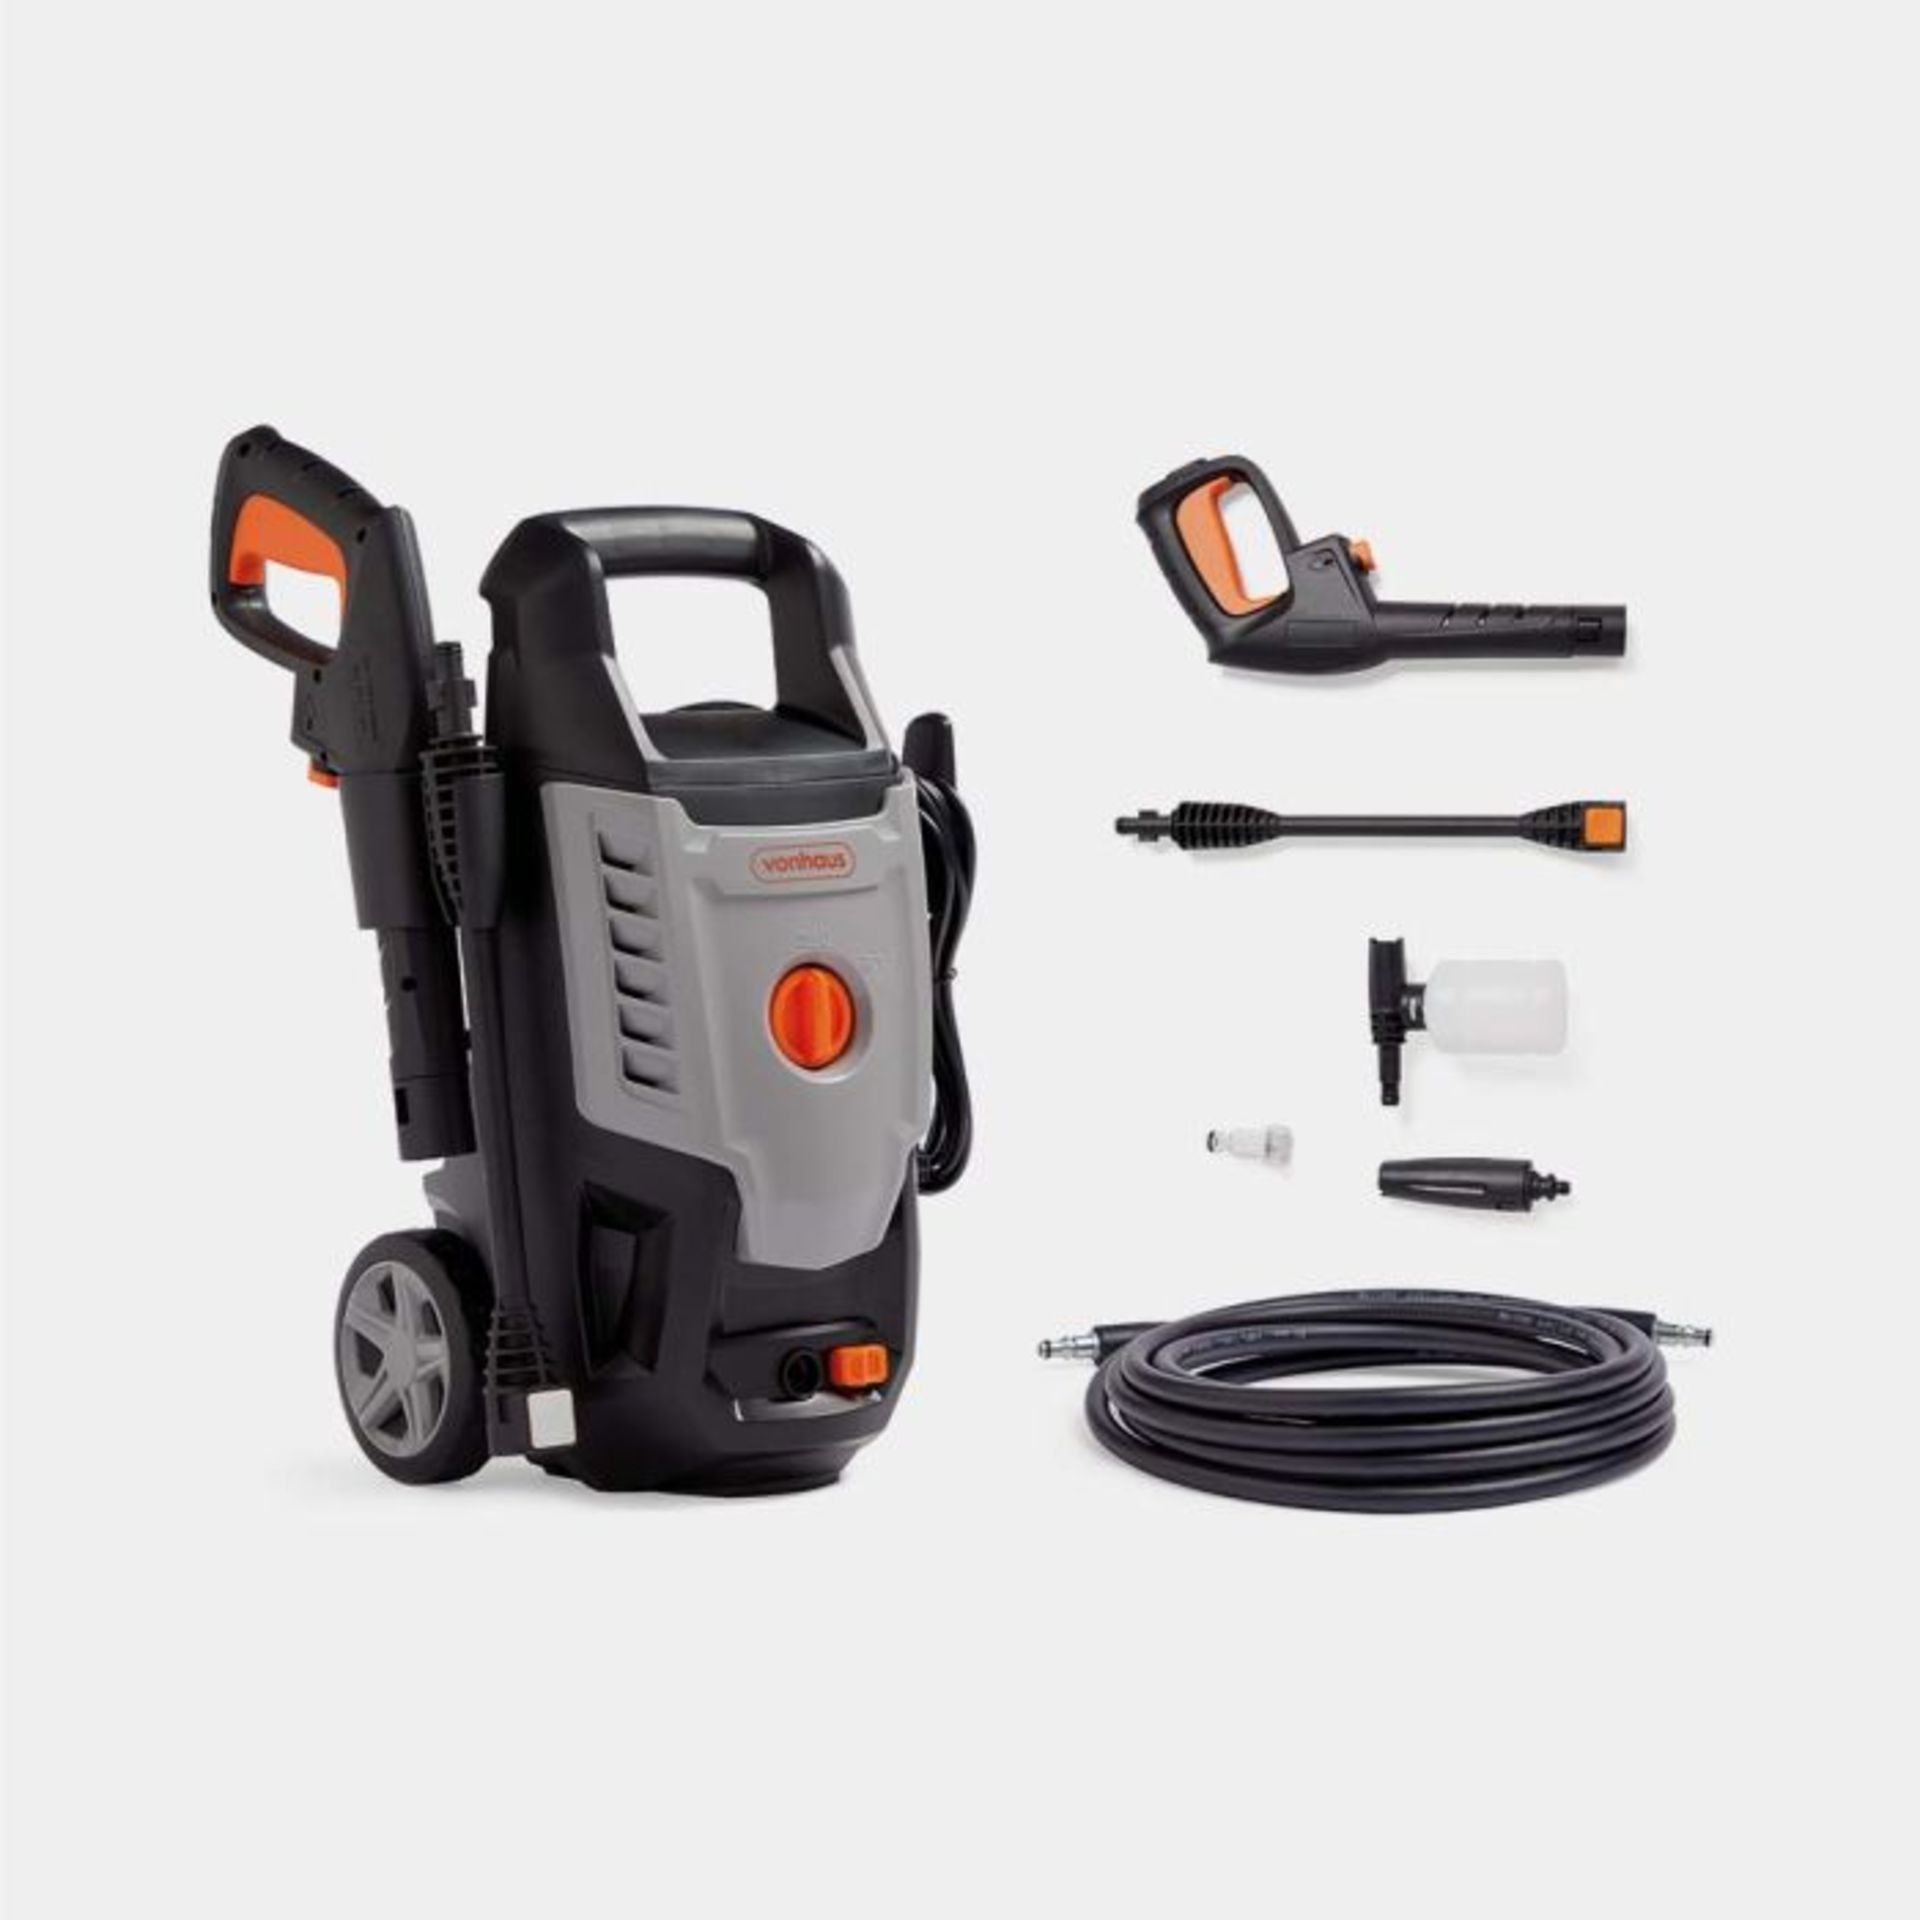 1600W Pressure Washer. - ER43. Use our 240V 50Hz 1600W Pressure Washer to tackle any cleaning task